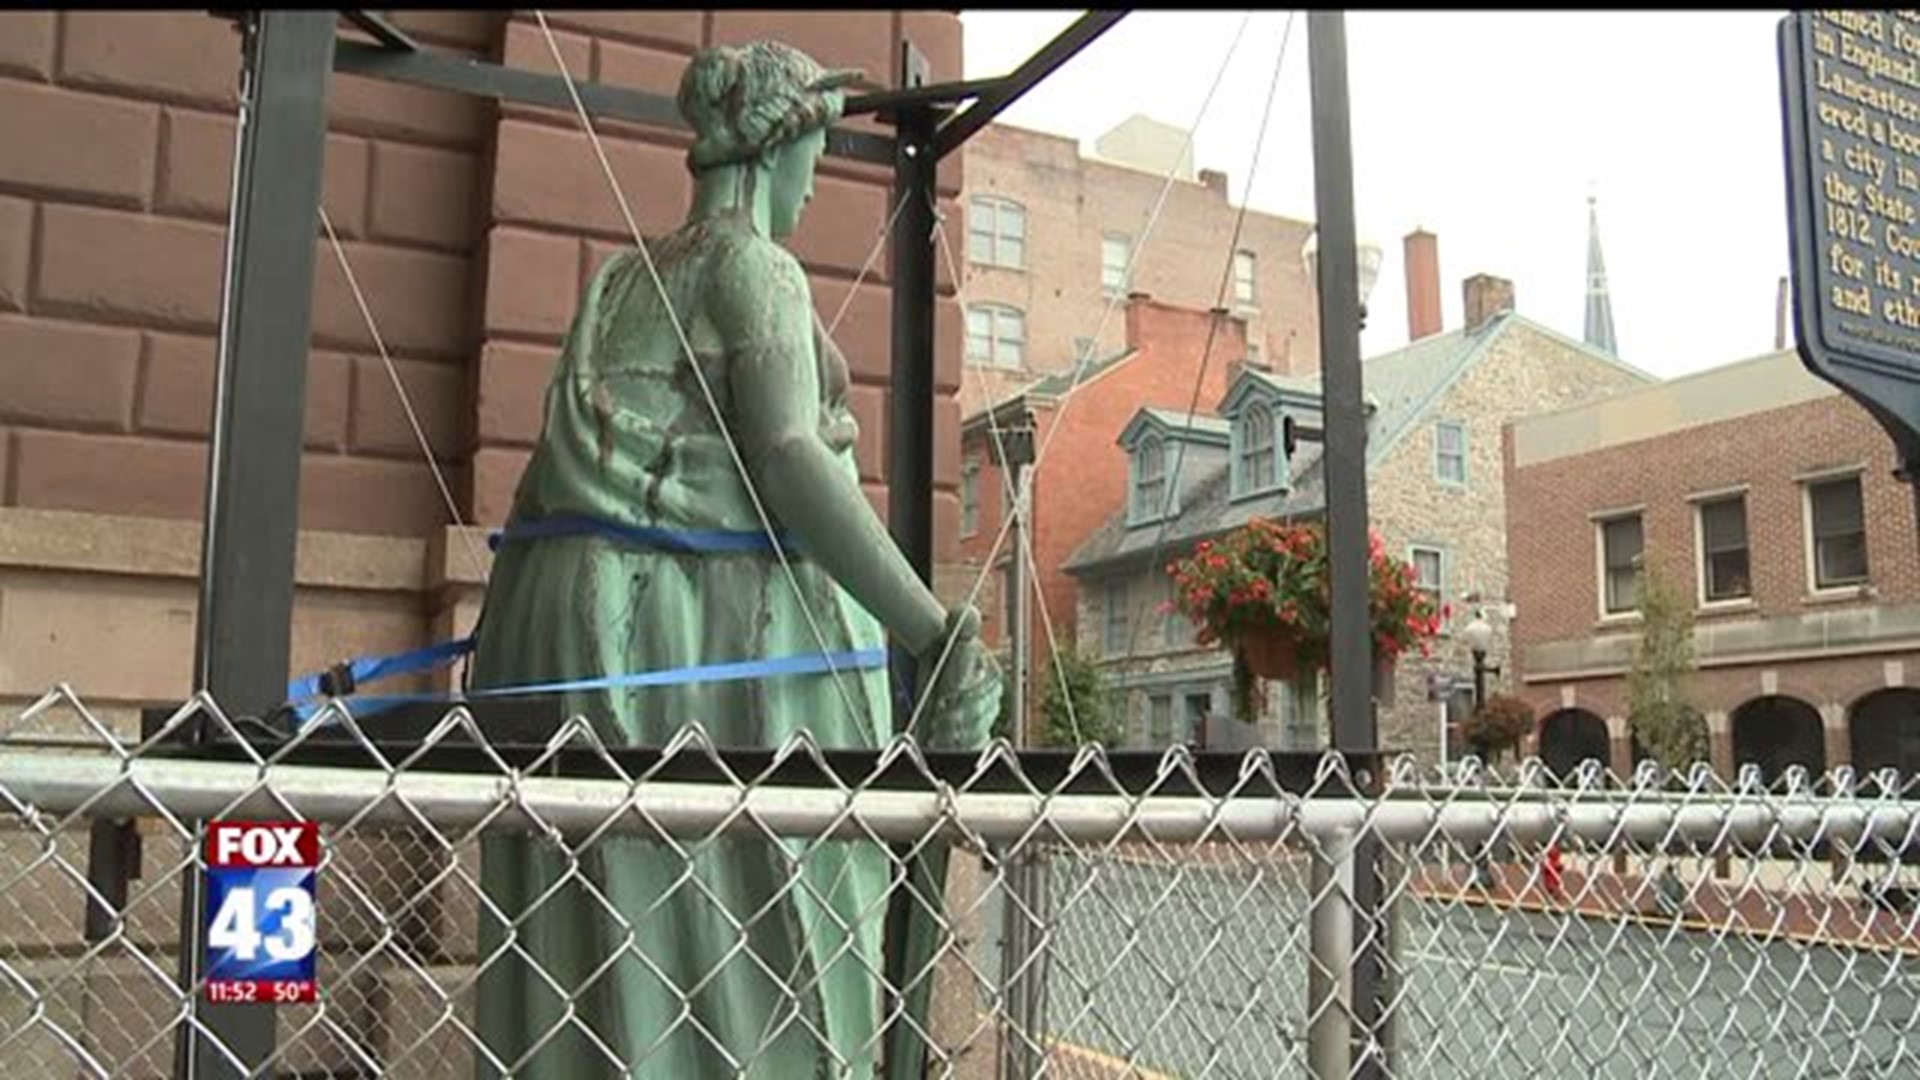 "Lady Justice" on Display in Lancaster